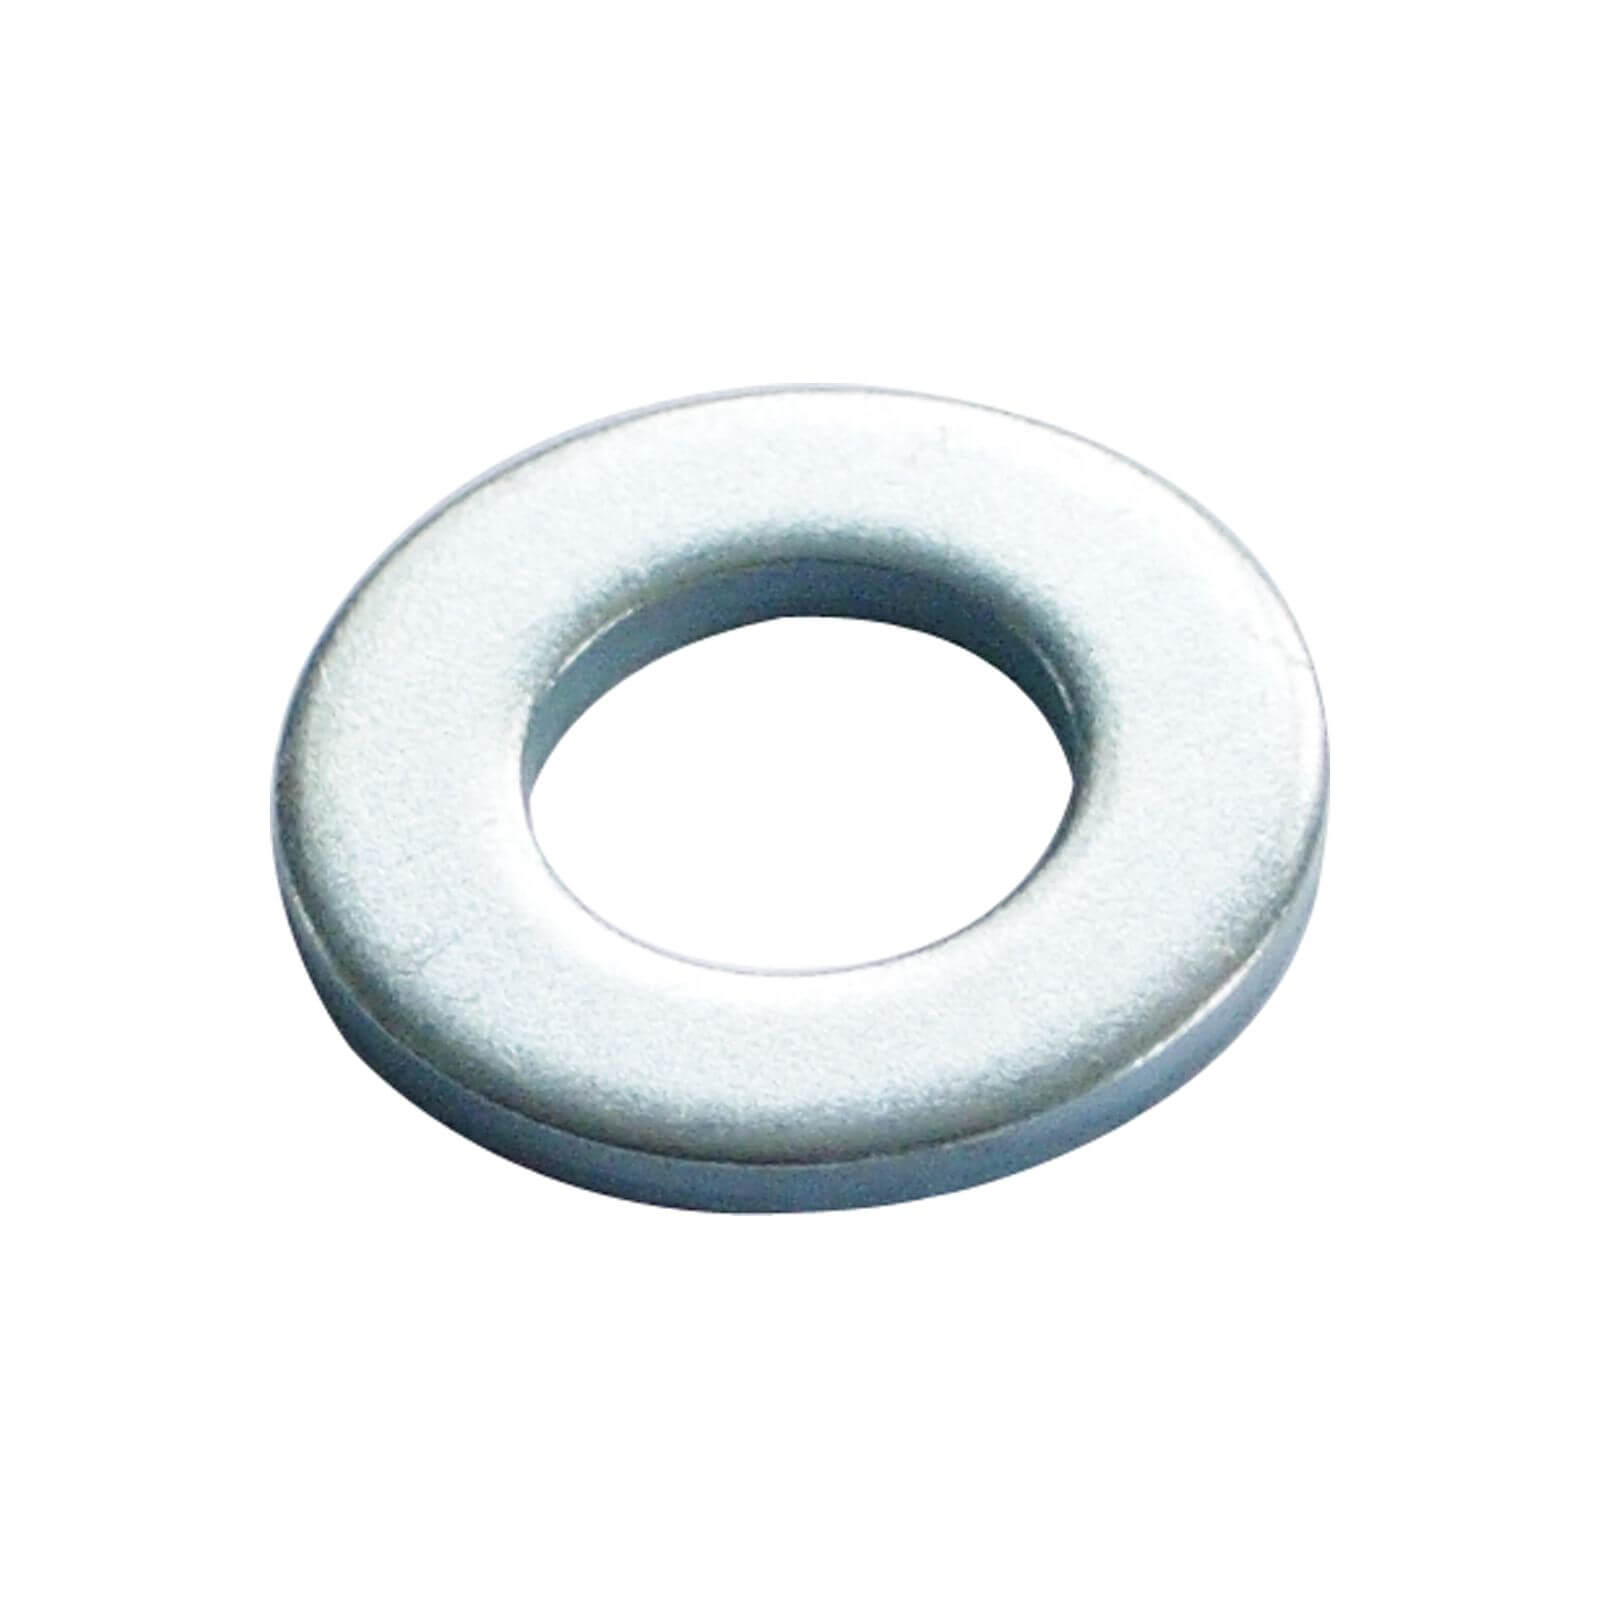 Washer - Bright Zinc Plated - M5 - 50 Pack